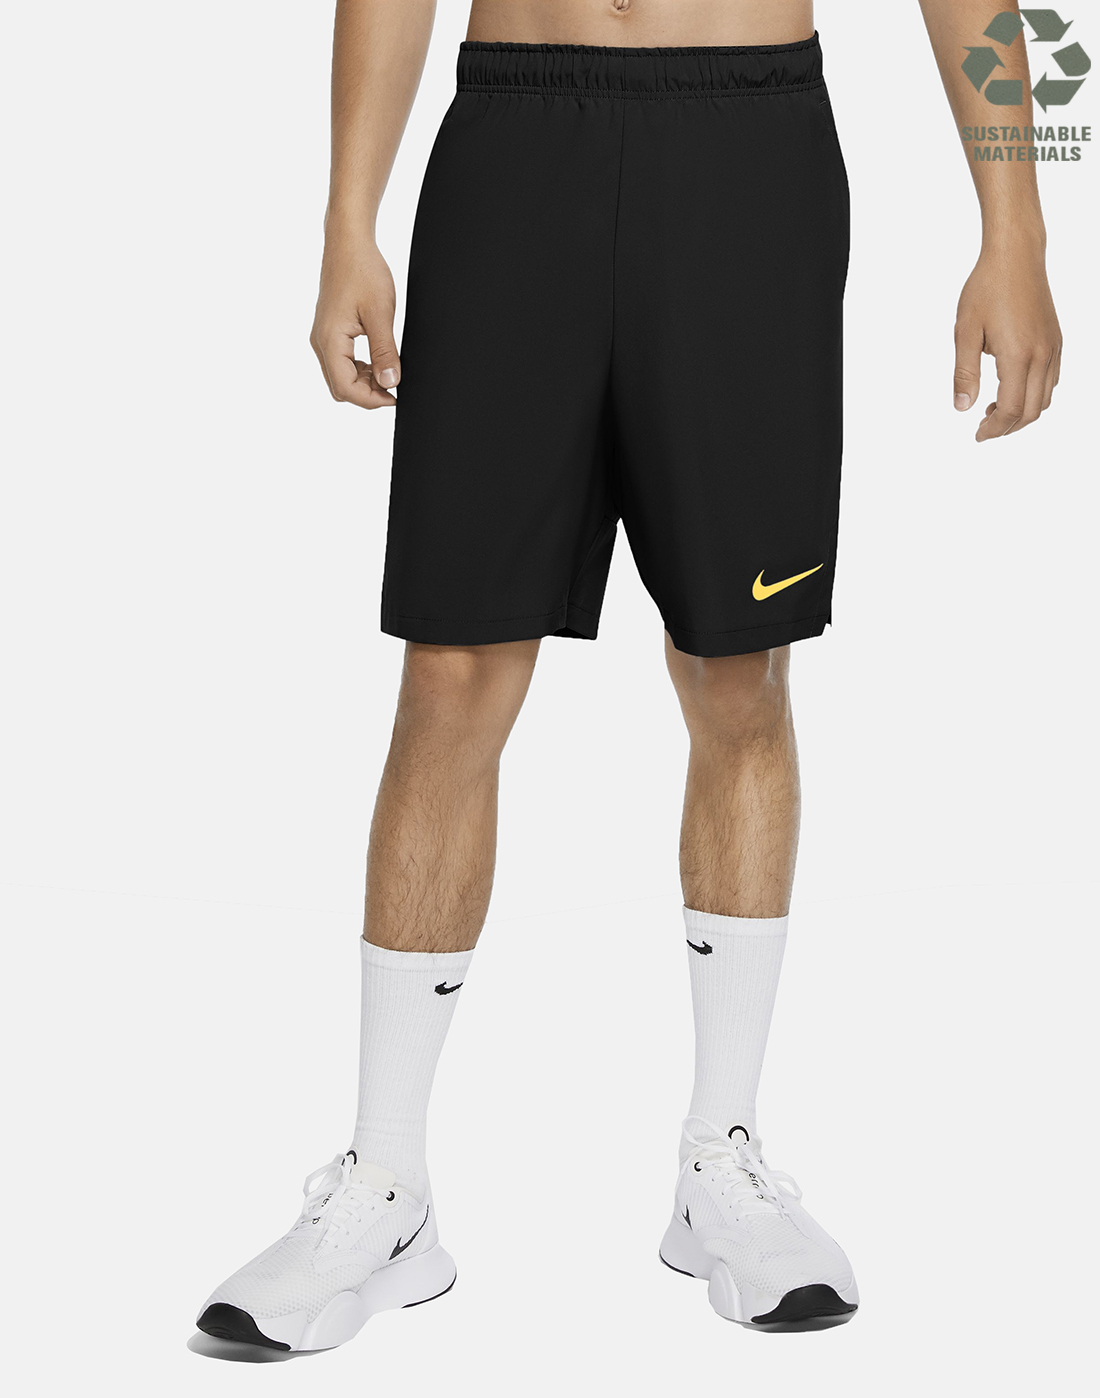 Nike Mens Dry Fit Woven Shorts - Black | Life Style Sports IE